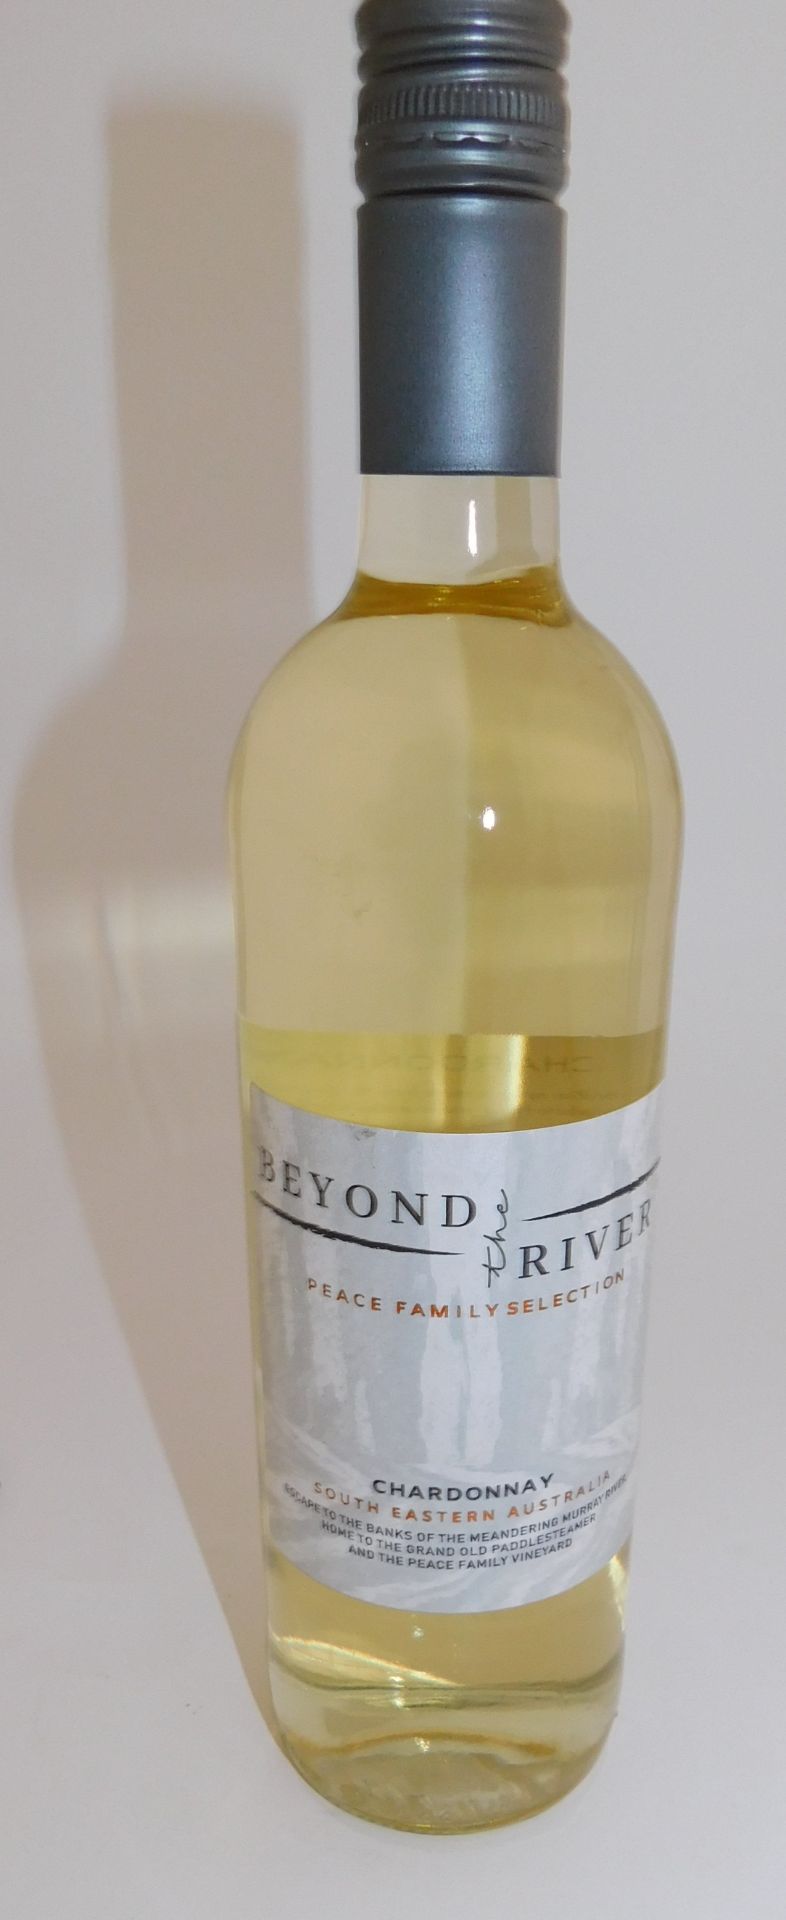 24 Bottles of Beyond the River Chardonnay, 75cl (Located Stockport – See General Notes for More